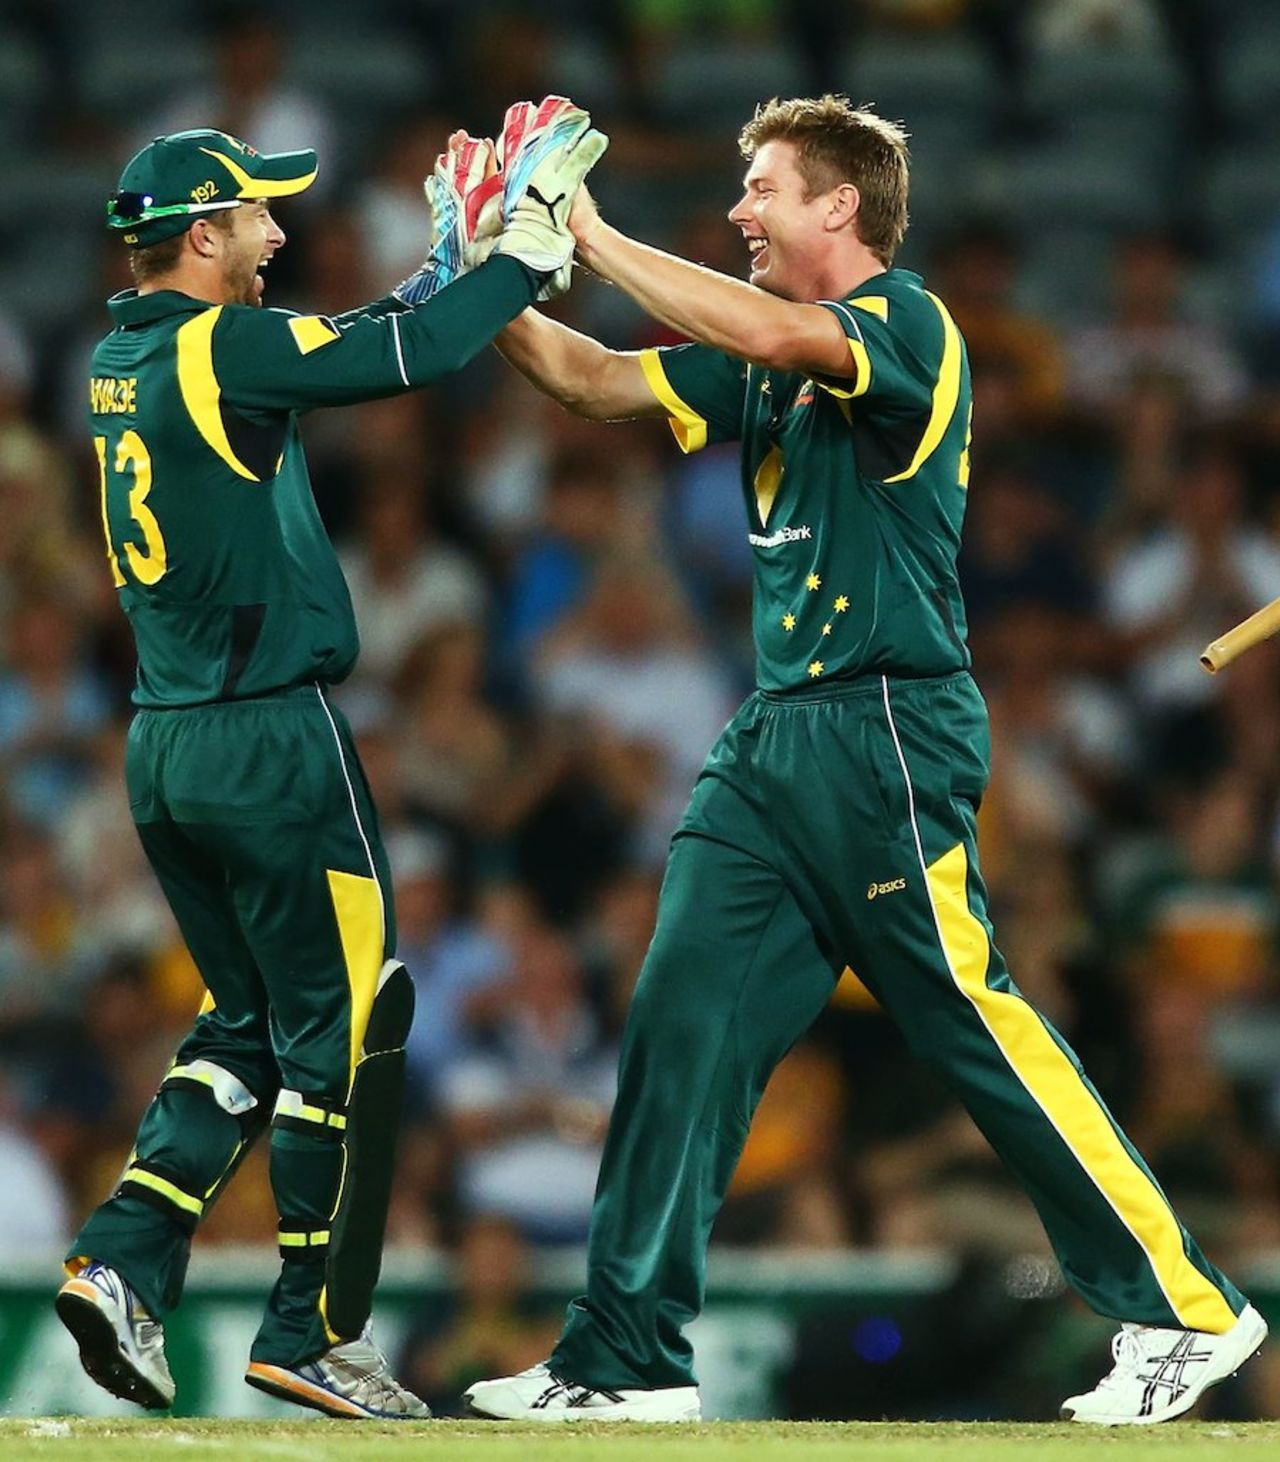 James Faulkner celebrates one of his four wickets, Australia v West Indies, 3rd ODI, Canberra, February 6, 2013